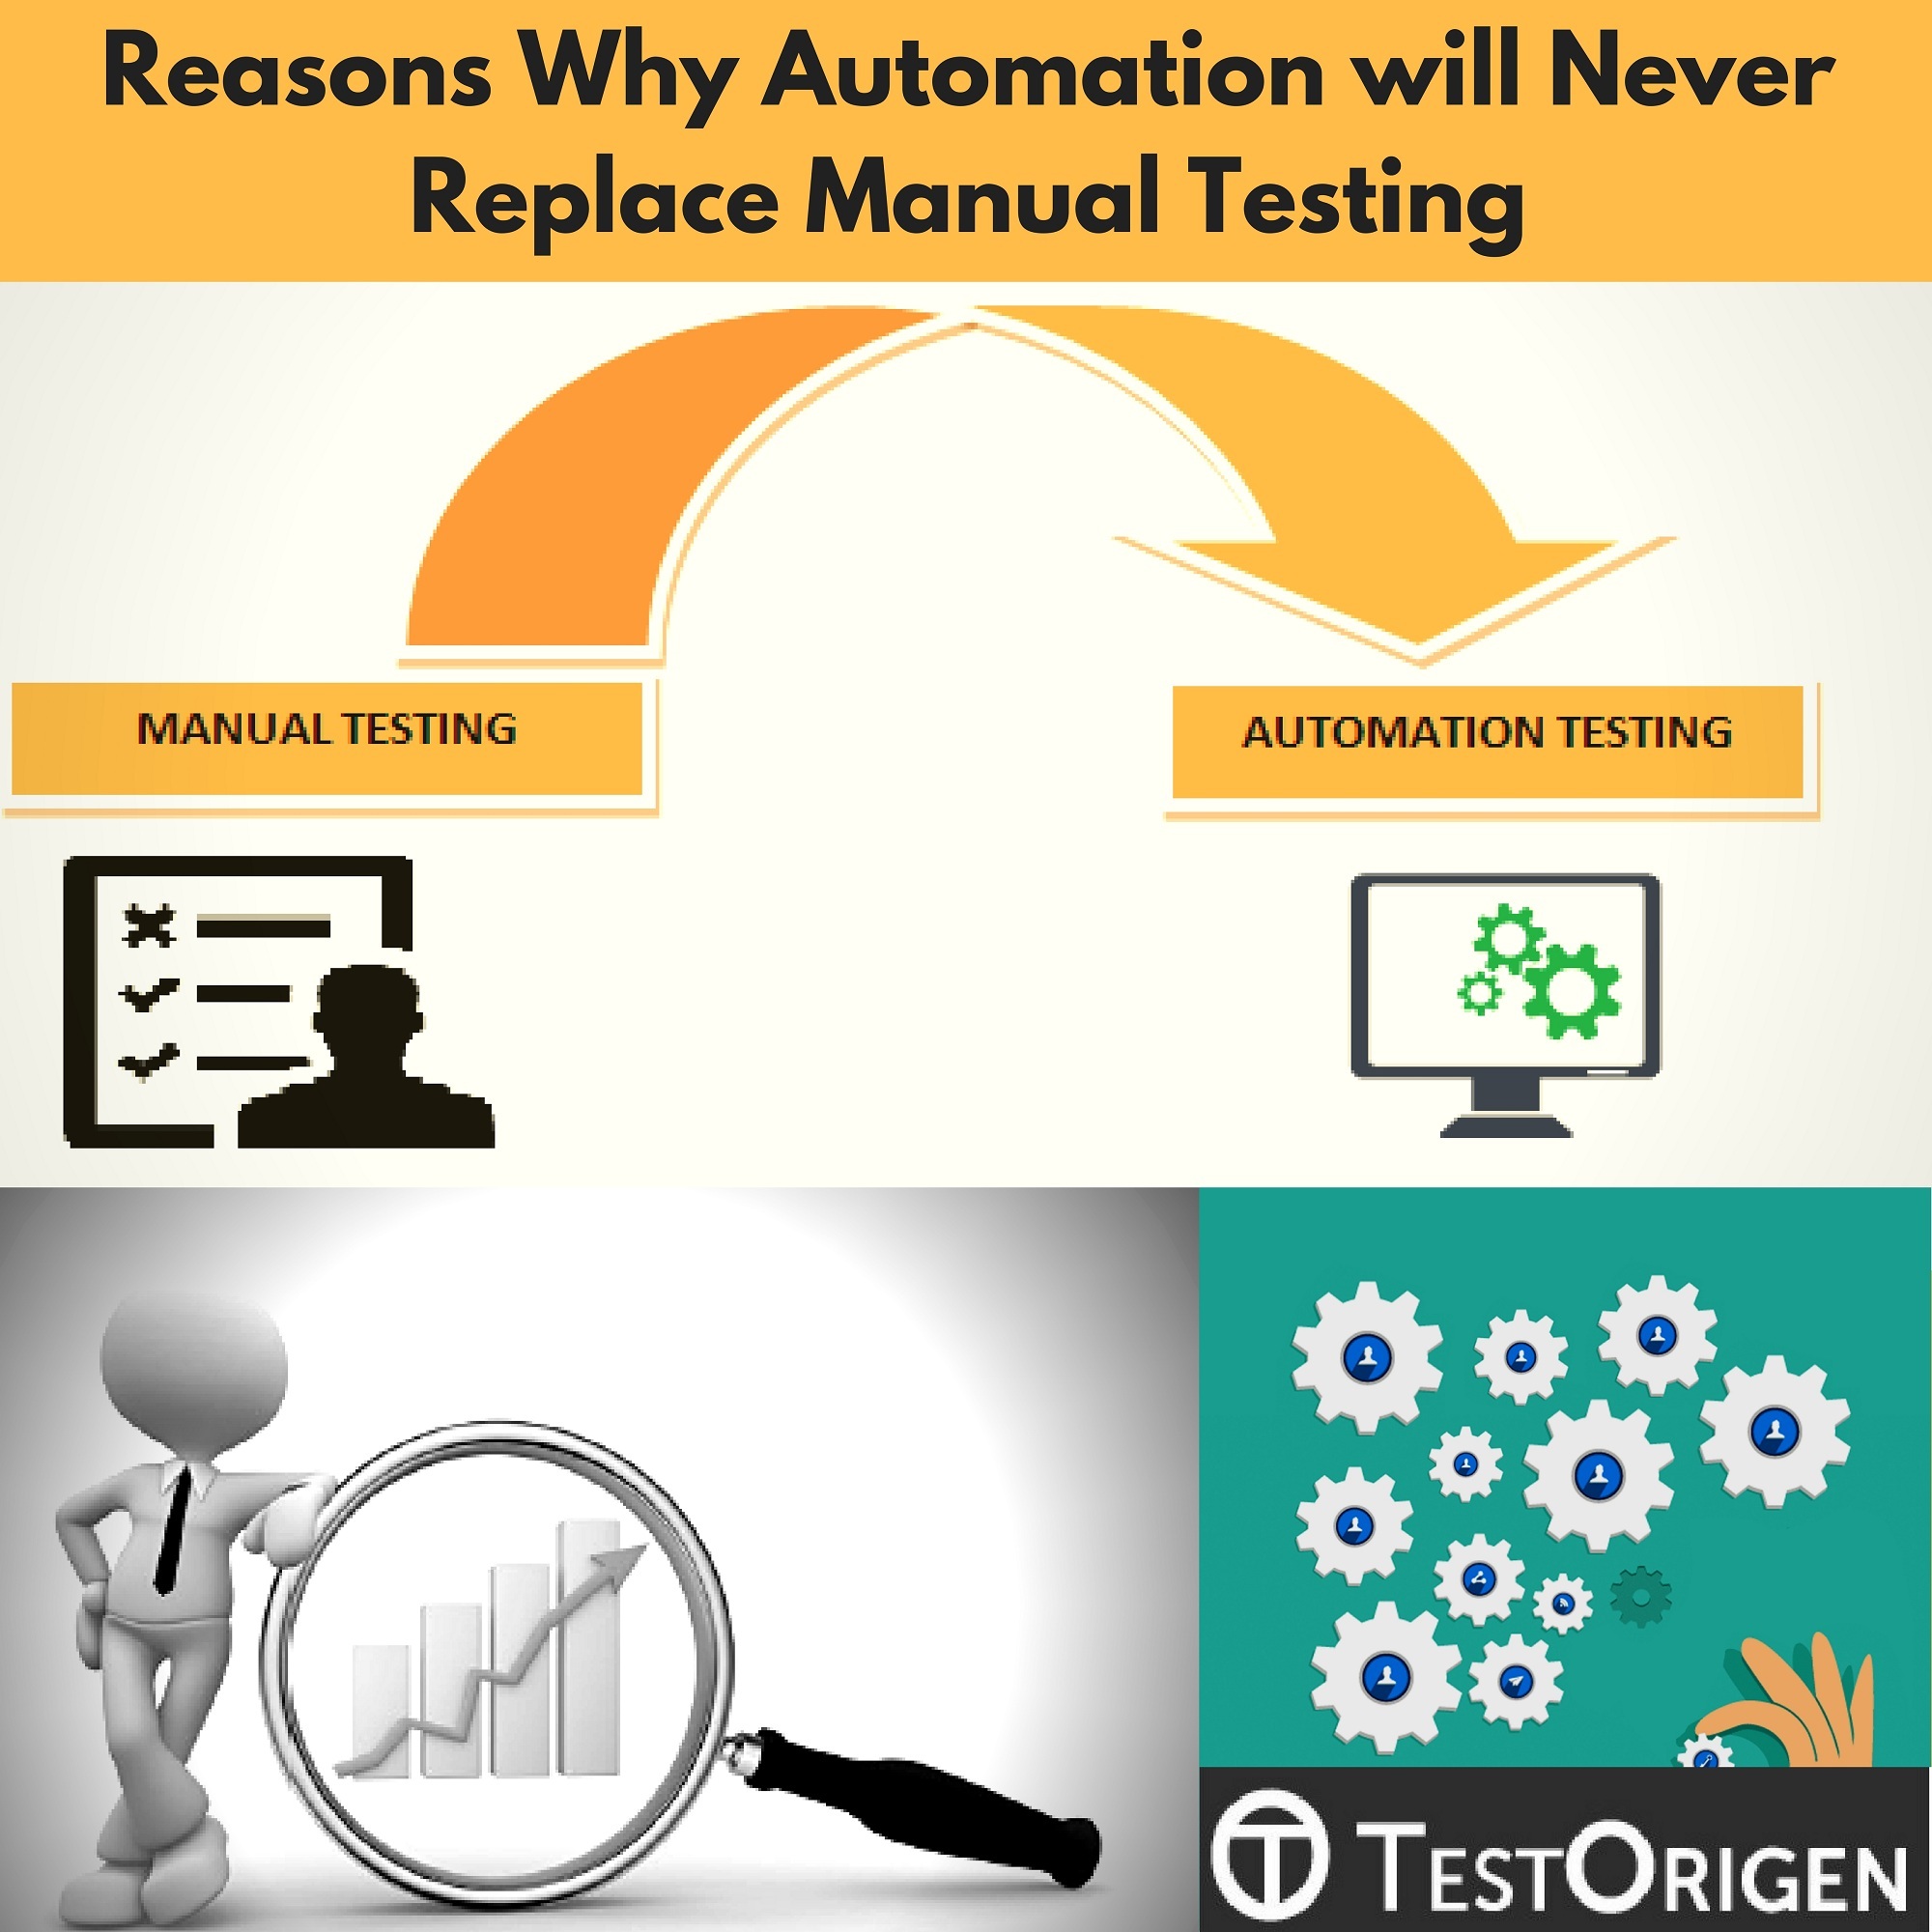 Reasons Why Automation will Never Replace Manual Testing